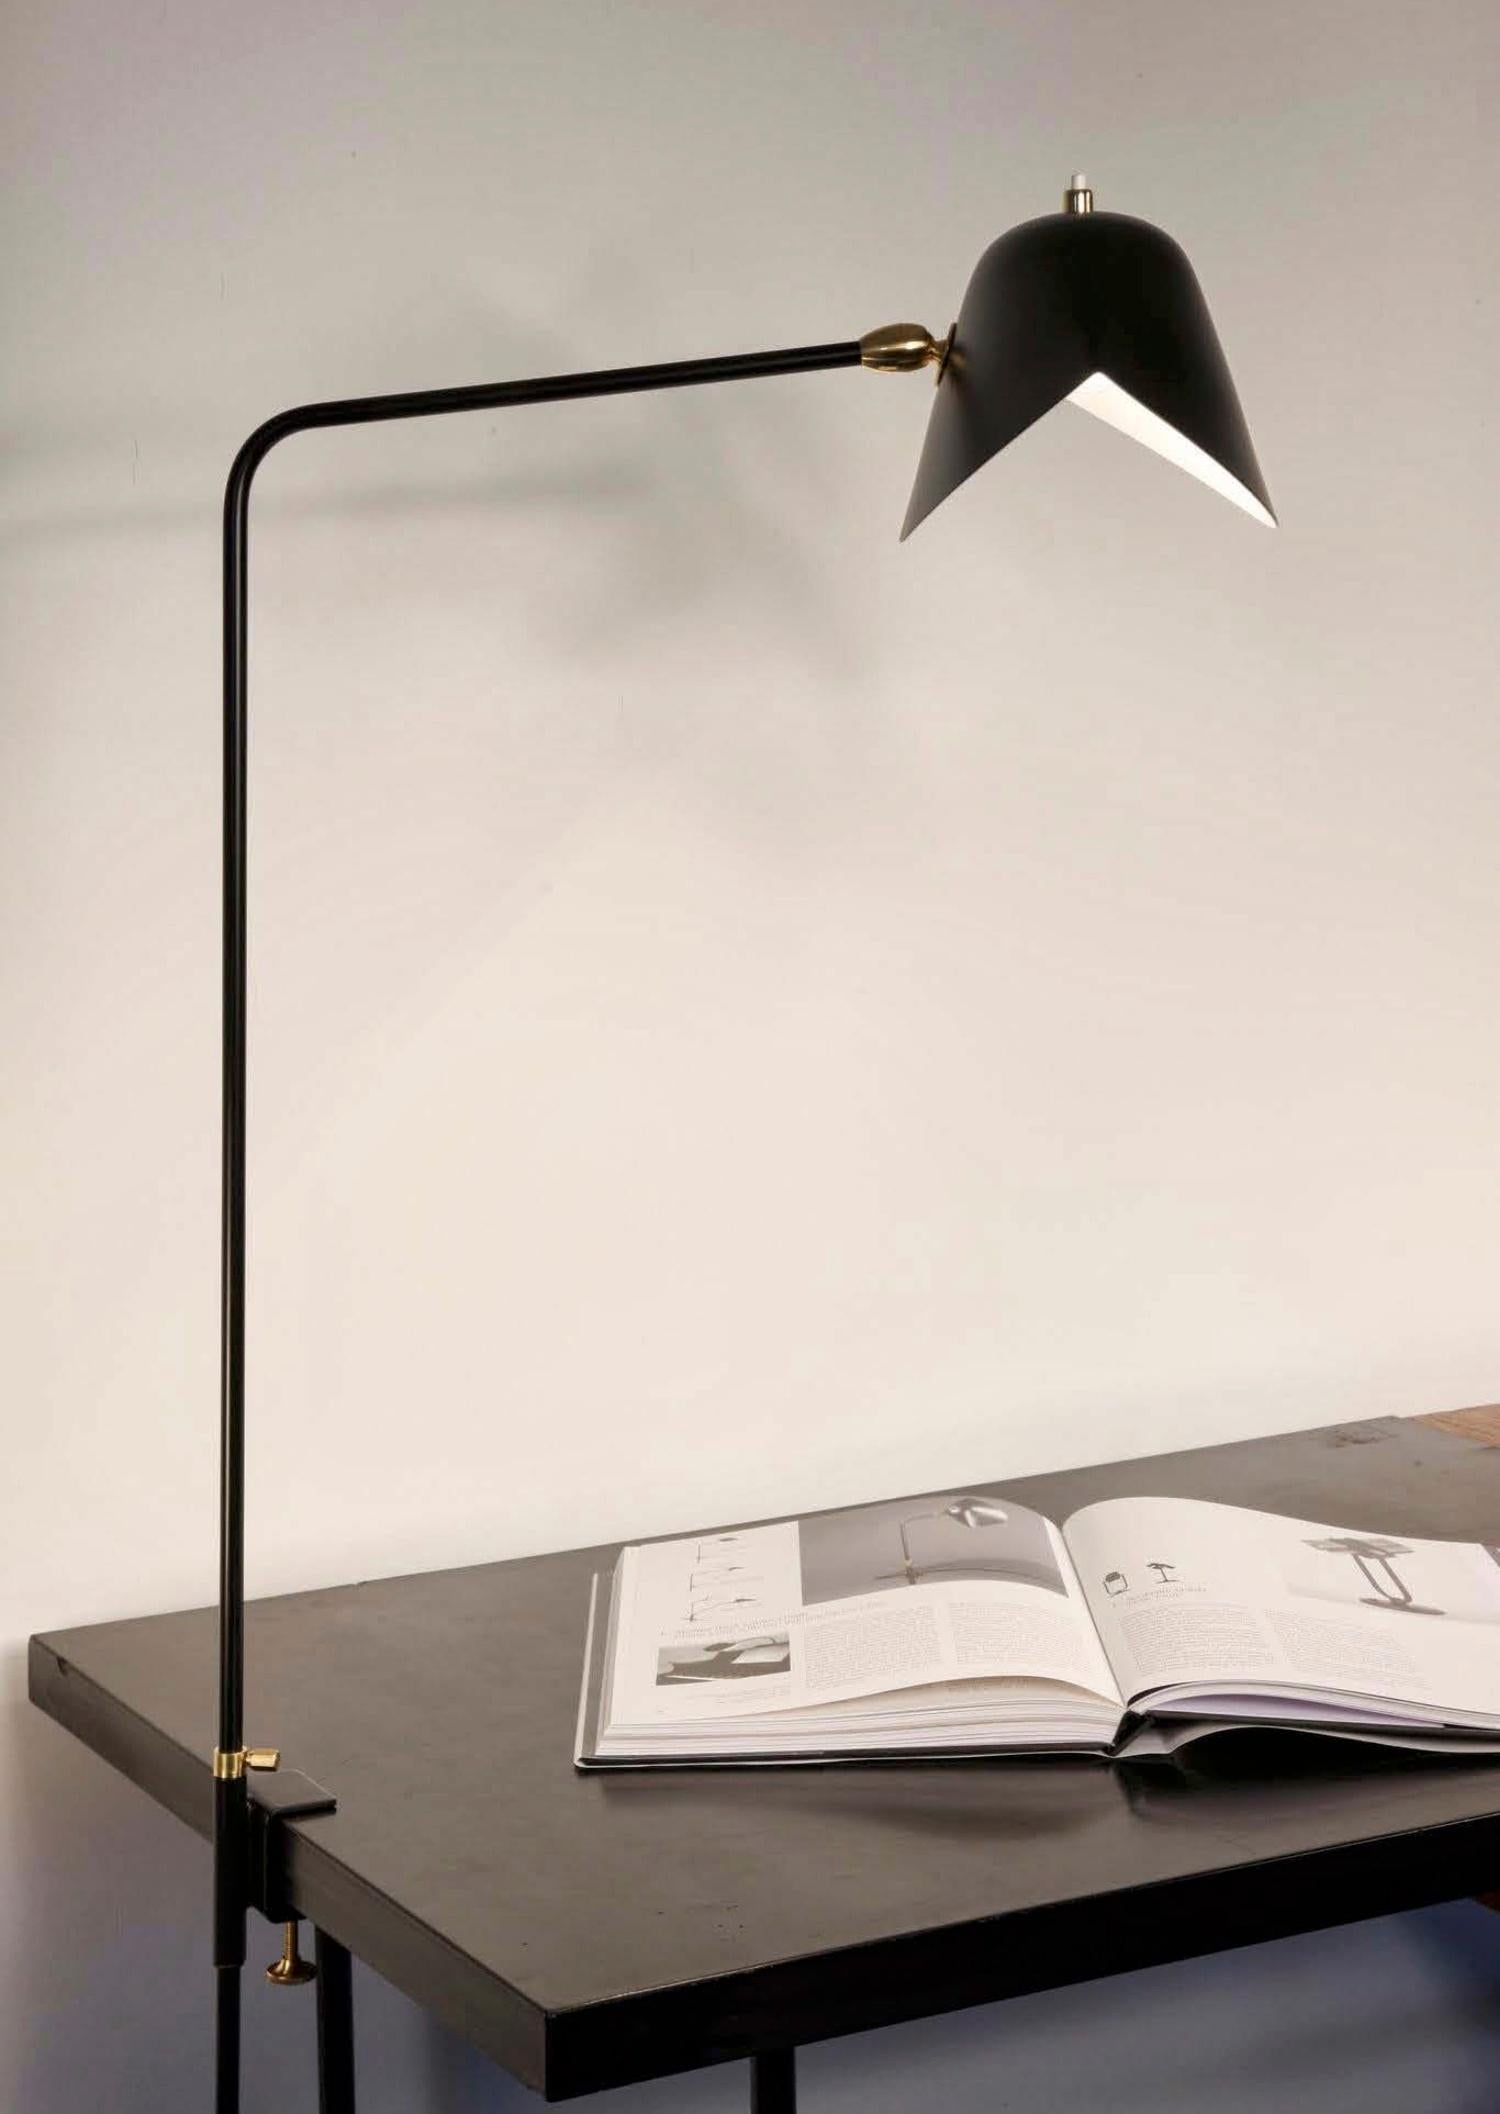 Clamp desk lamp. At 26 inches at its highest, this lamp may affix to many surfaces providing direct lighting where it is needed.

Available in white or black. Brass swivels connect the shades.

COLOR OPTION
Available in Black or